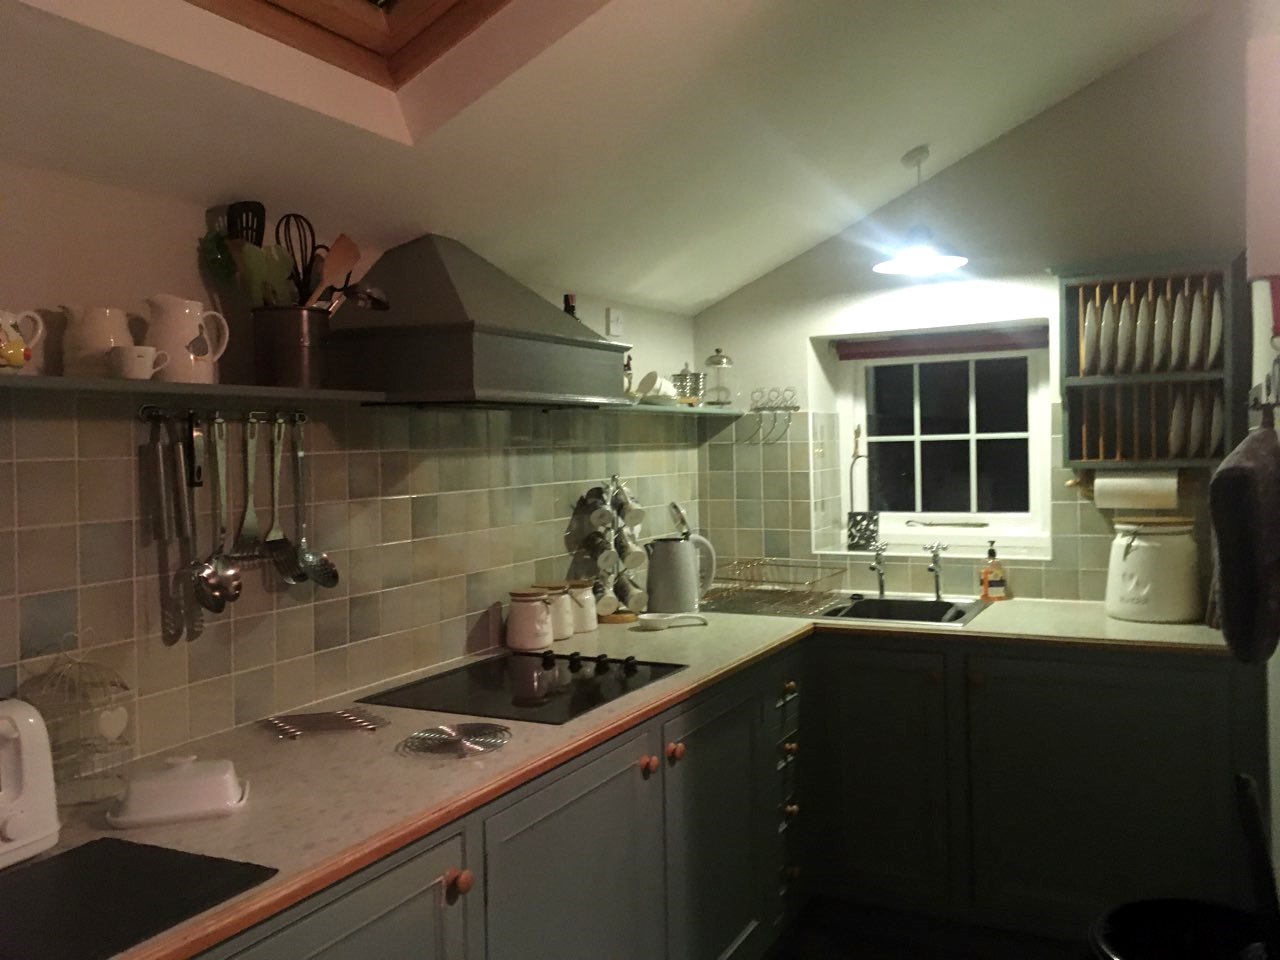 The Kitchen in the Cottage at the Old Rectory, Boduan